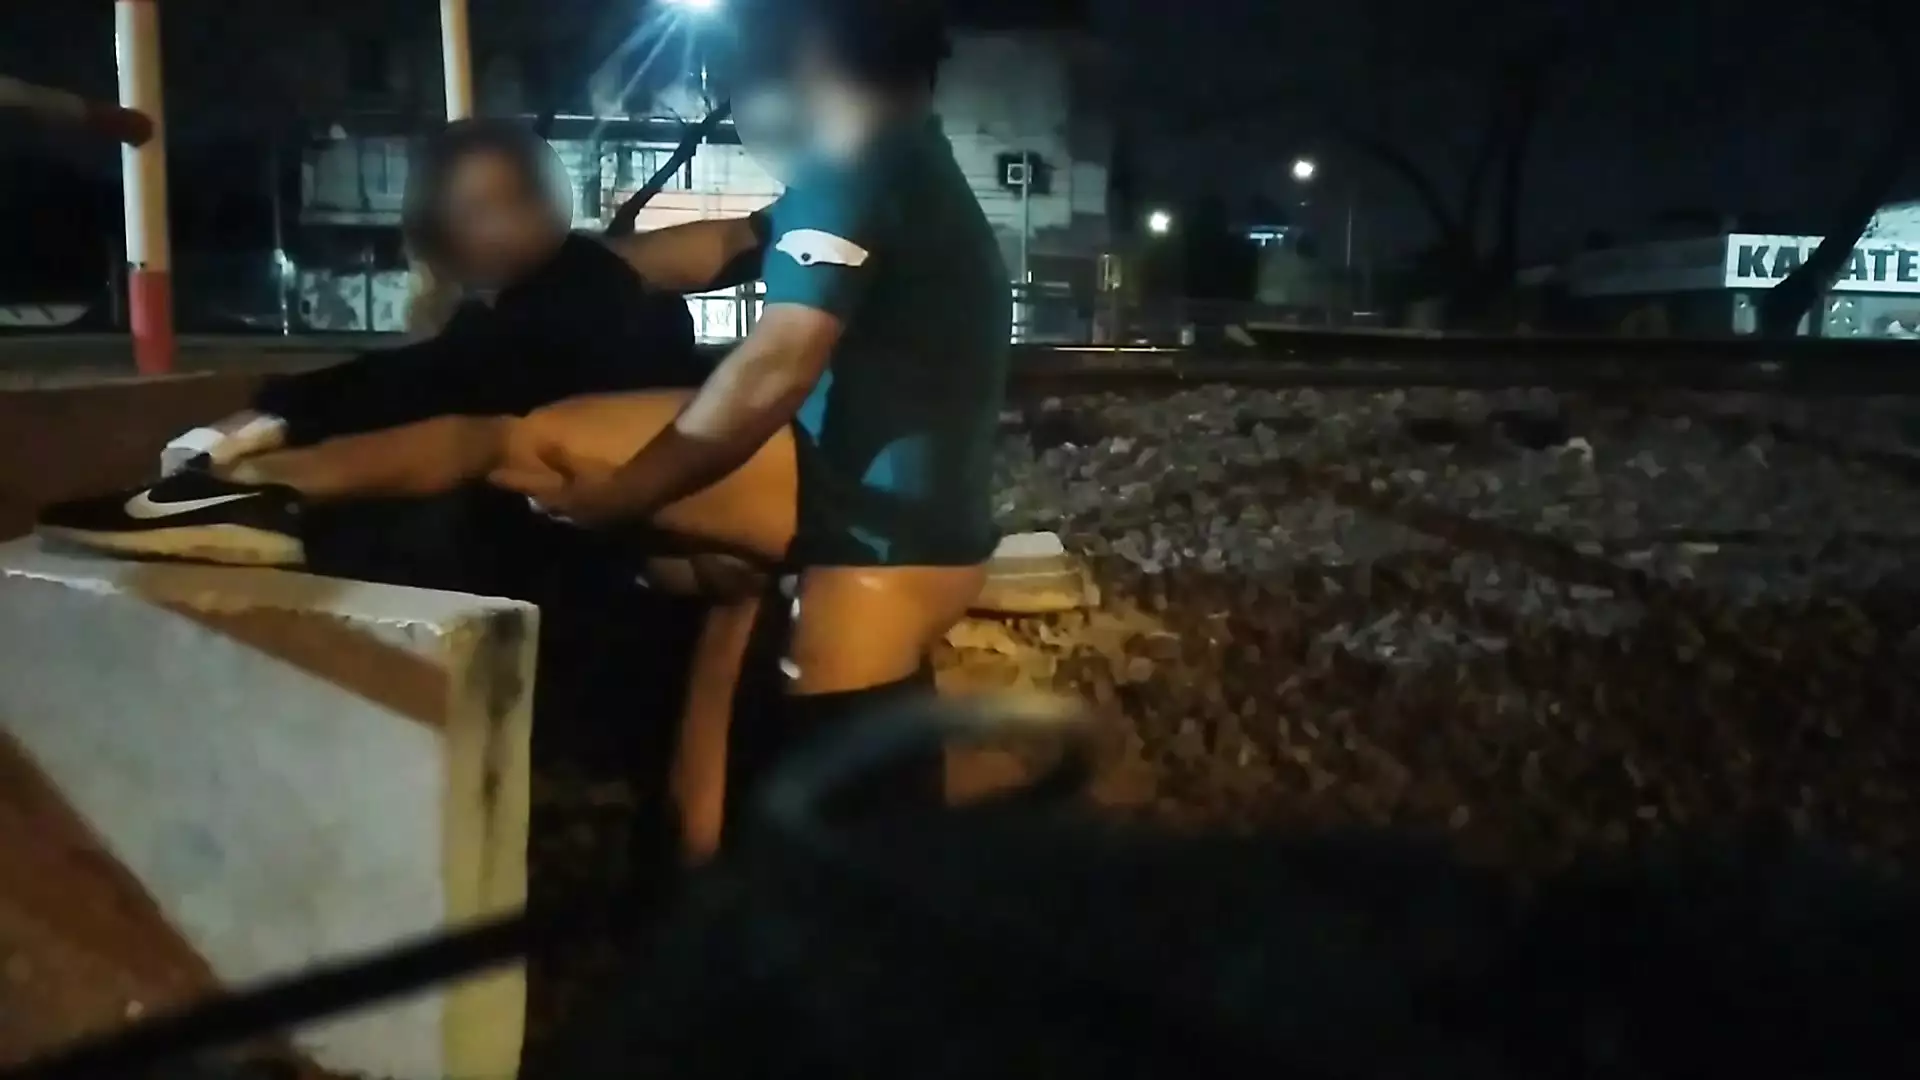 sex on the streets in public caught by stranger voyeurs walking naked through the city